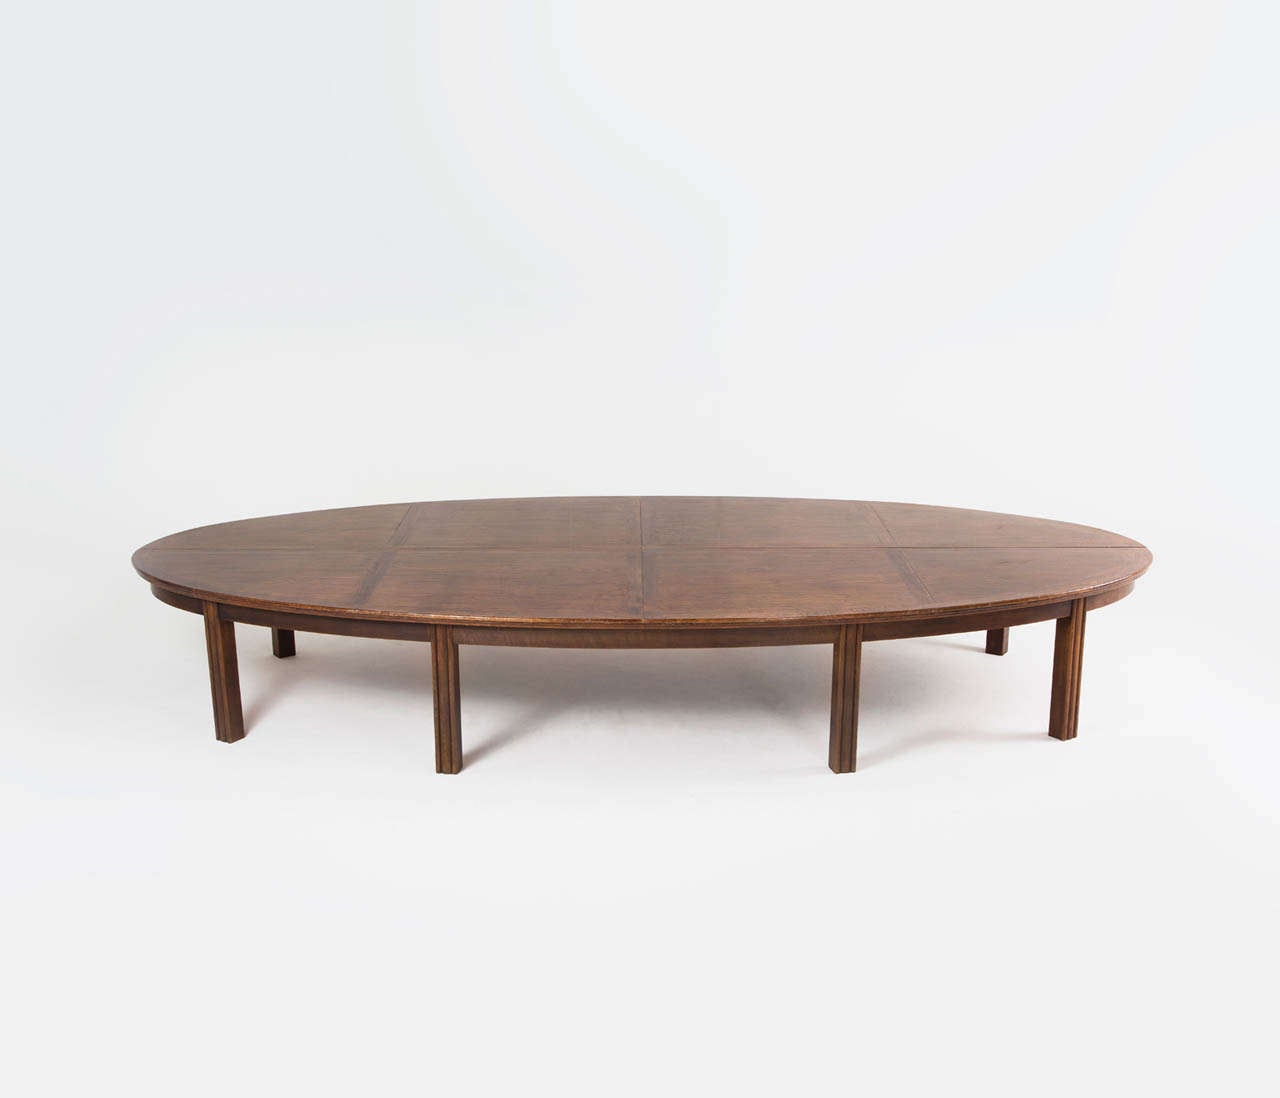 Conference table in oak, the Netherlands, 1950s.

Beautiful aged oval shaped conference or dining table in Art Deco style. The characteristic grain and pattern give this table an authentic and pleasant look.

Free shipping for all European